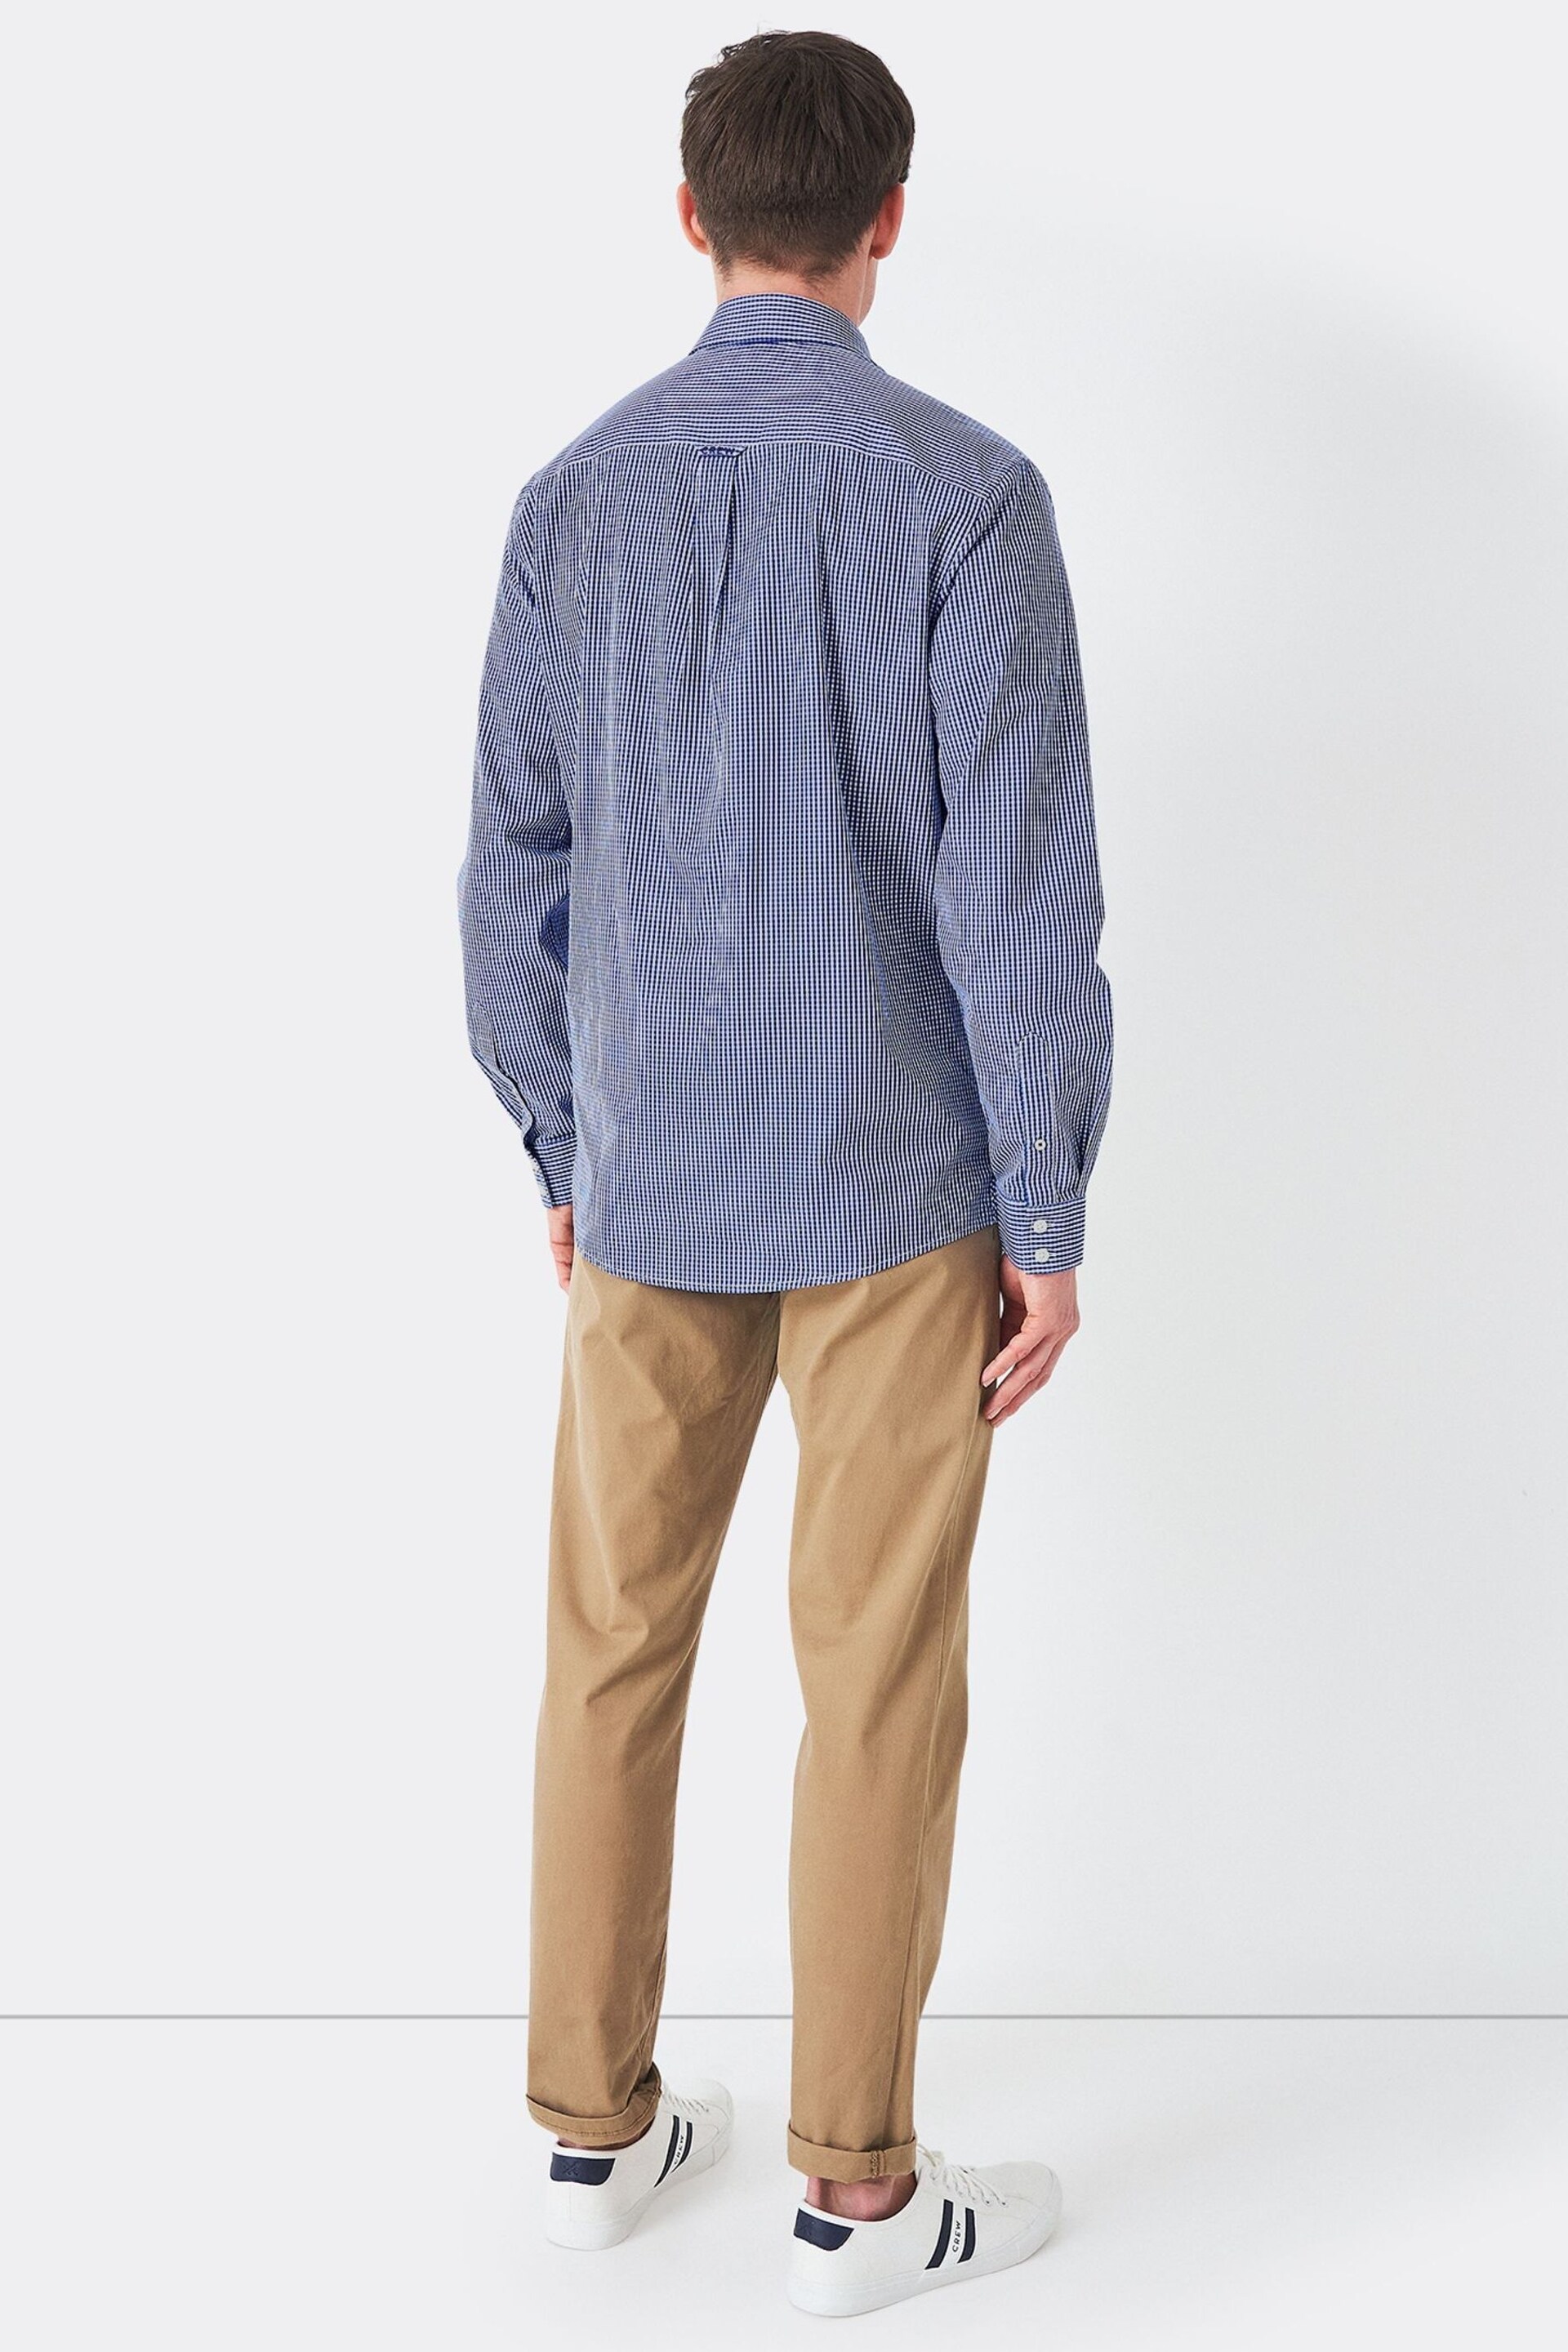 Crew Clothing Classic Fit Micro Gingham Shirt - Image 2 of 4